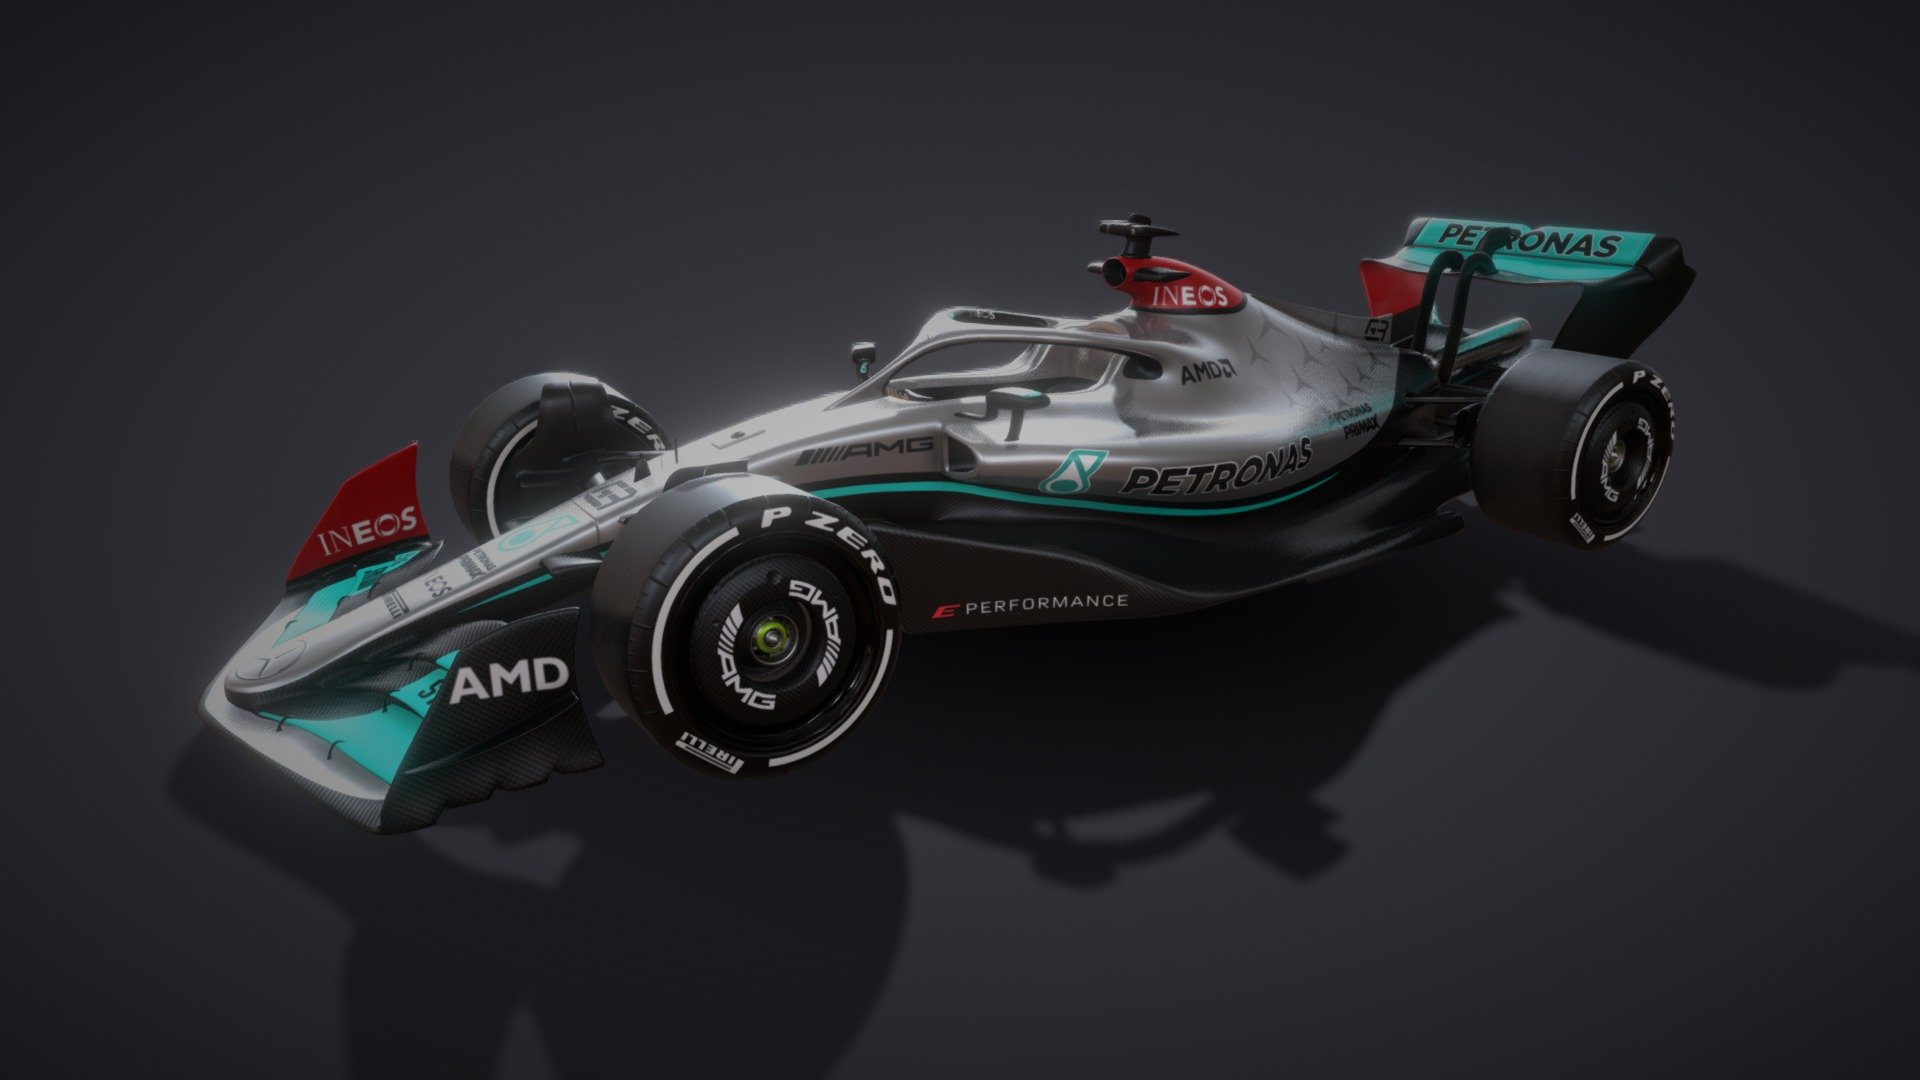 Formula 1 car modelled in stunning detail to accurately represent the new generation of F1 cars for the 2022 season. This model features the Mercedes AMG livery as seen on the current 2022 Mercedes F1 car. The model includes a fully rigged and animated DRS rear wing, removable wheels and removable front wing (see images below). The high resolution model has been baked into an optimised mesh for easy rendering and game engine use. The model is subdivision-ready with 4k resolution textures.

The additional files include the asset as FBX, OBJ and STL file formats. Also included is the original Blender file with all of the individual parts used for modelling the asset.

The included Blender file is completely set up with all the textures and settings you need to immediately start rendering the image below:


The front wing and wheels can be removed to produce pitstop and garage recreations:
 - F1 2022 Mercedes Livery - Buy Royalty Free 3D model by Nick Broad (@nickbroad) 3d model